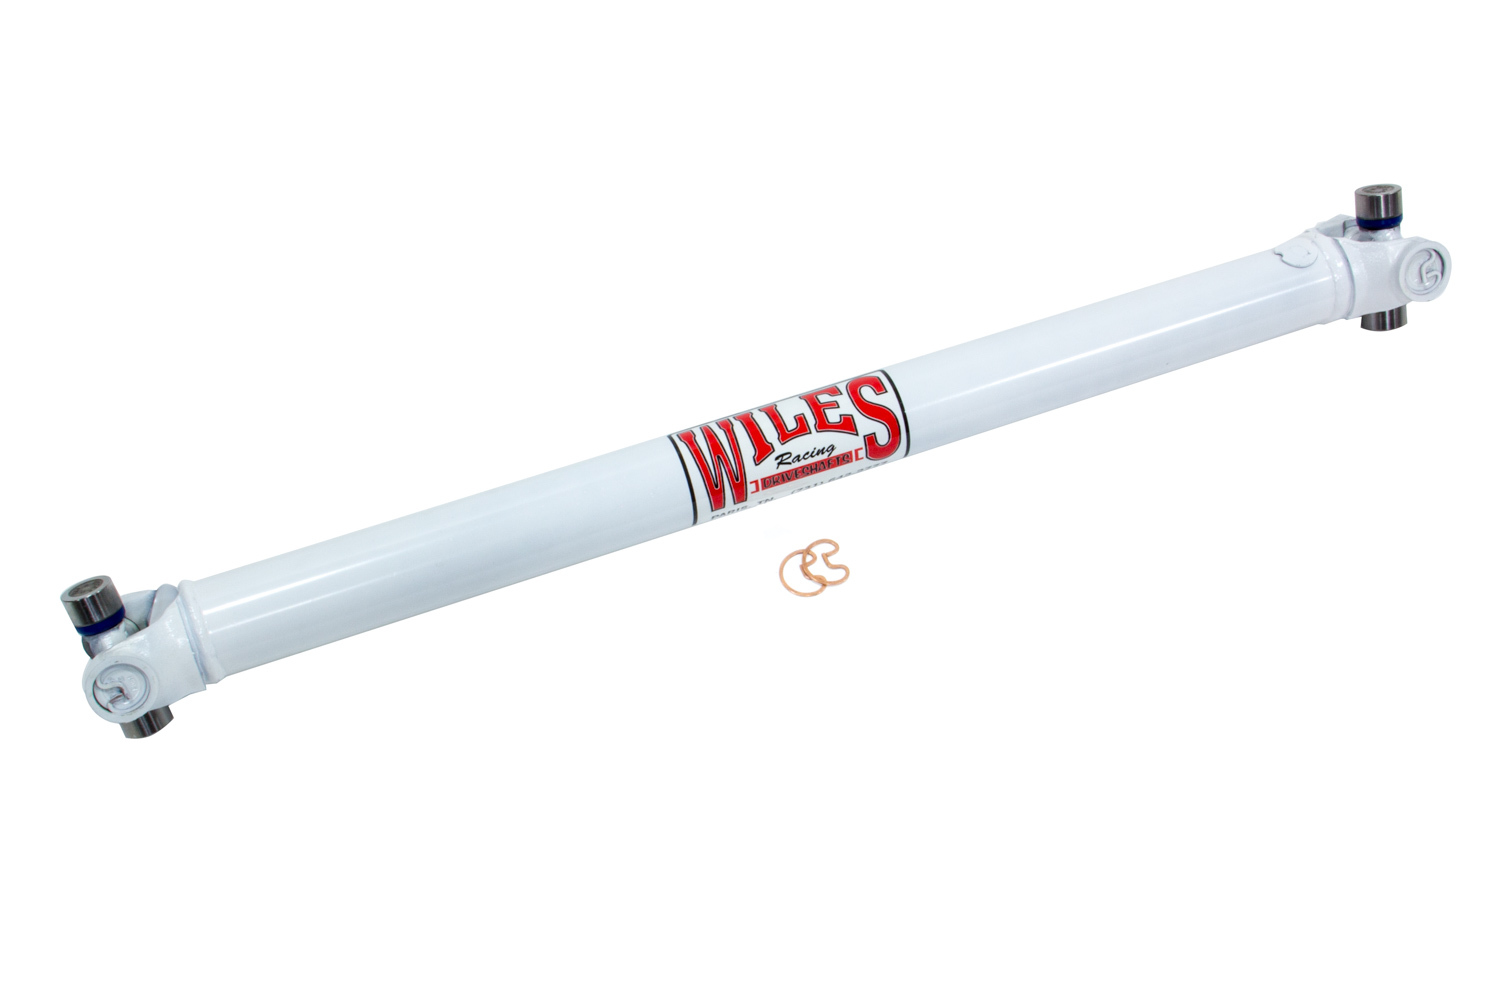 Wiles Driveshaft S283315 Drive Shaft, 31.500 in Long, 2 in OD, 1310 U-Joints, Steel, White Paint, Universal, Each